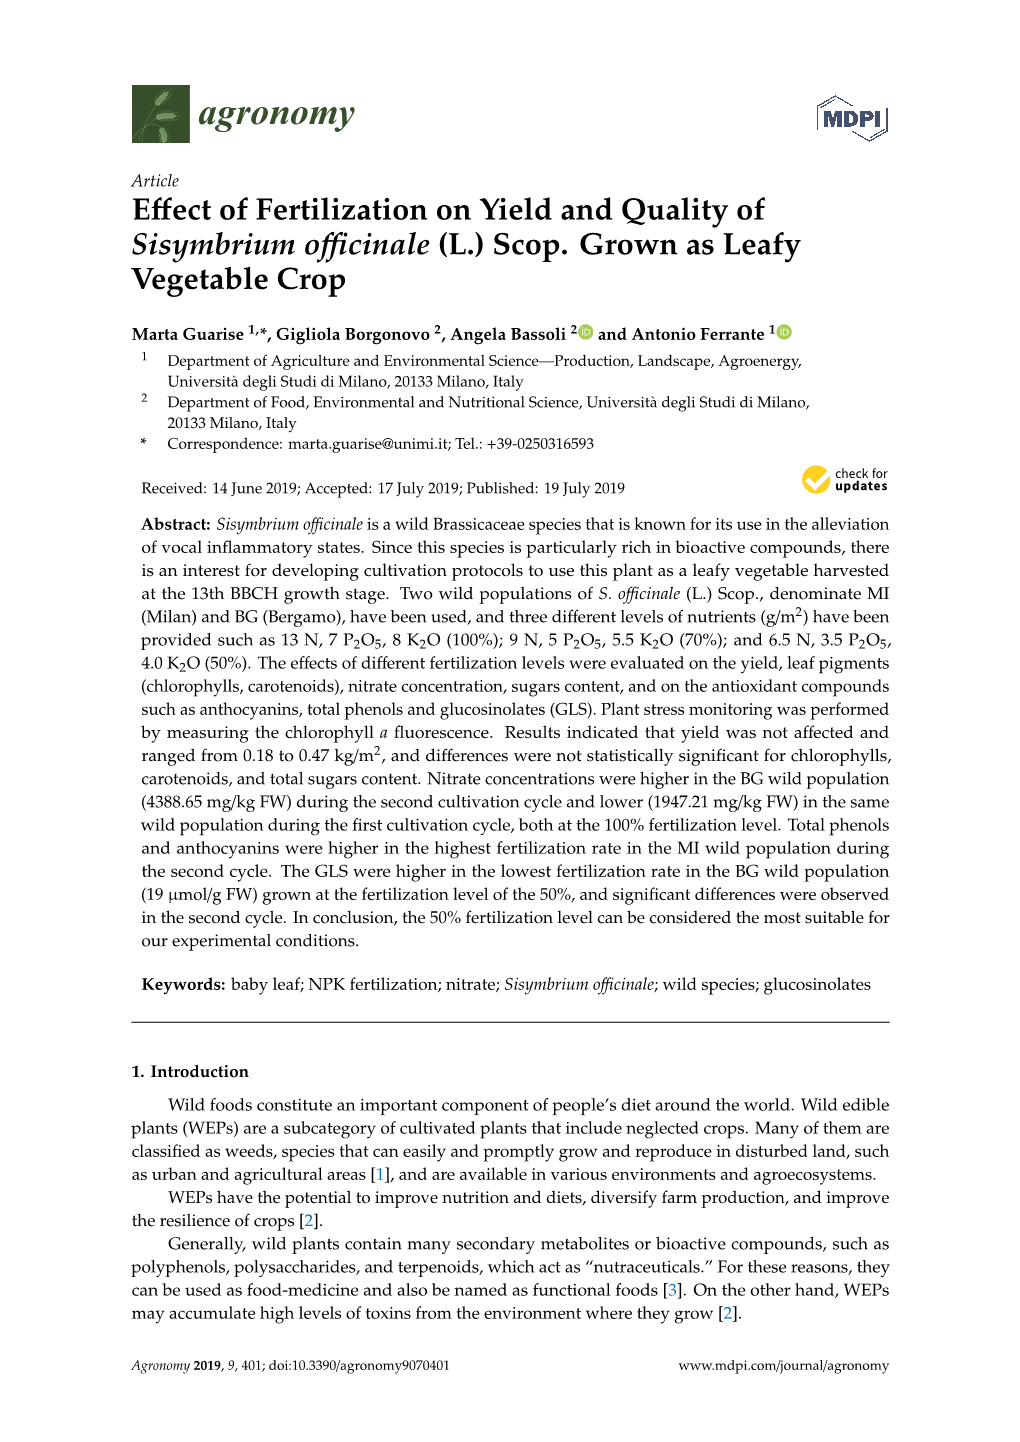 Effect of Fertilization on Yield and Quality of Sisymbrium Officinale (L